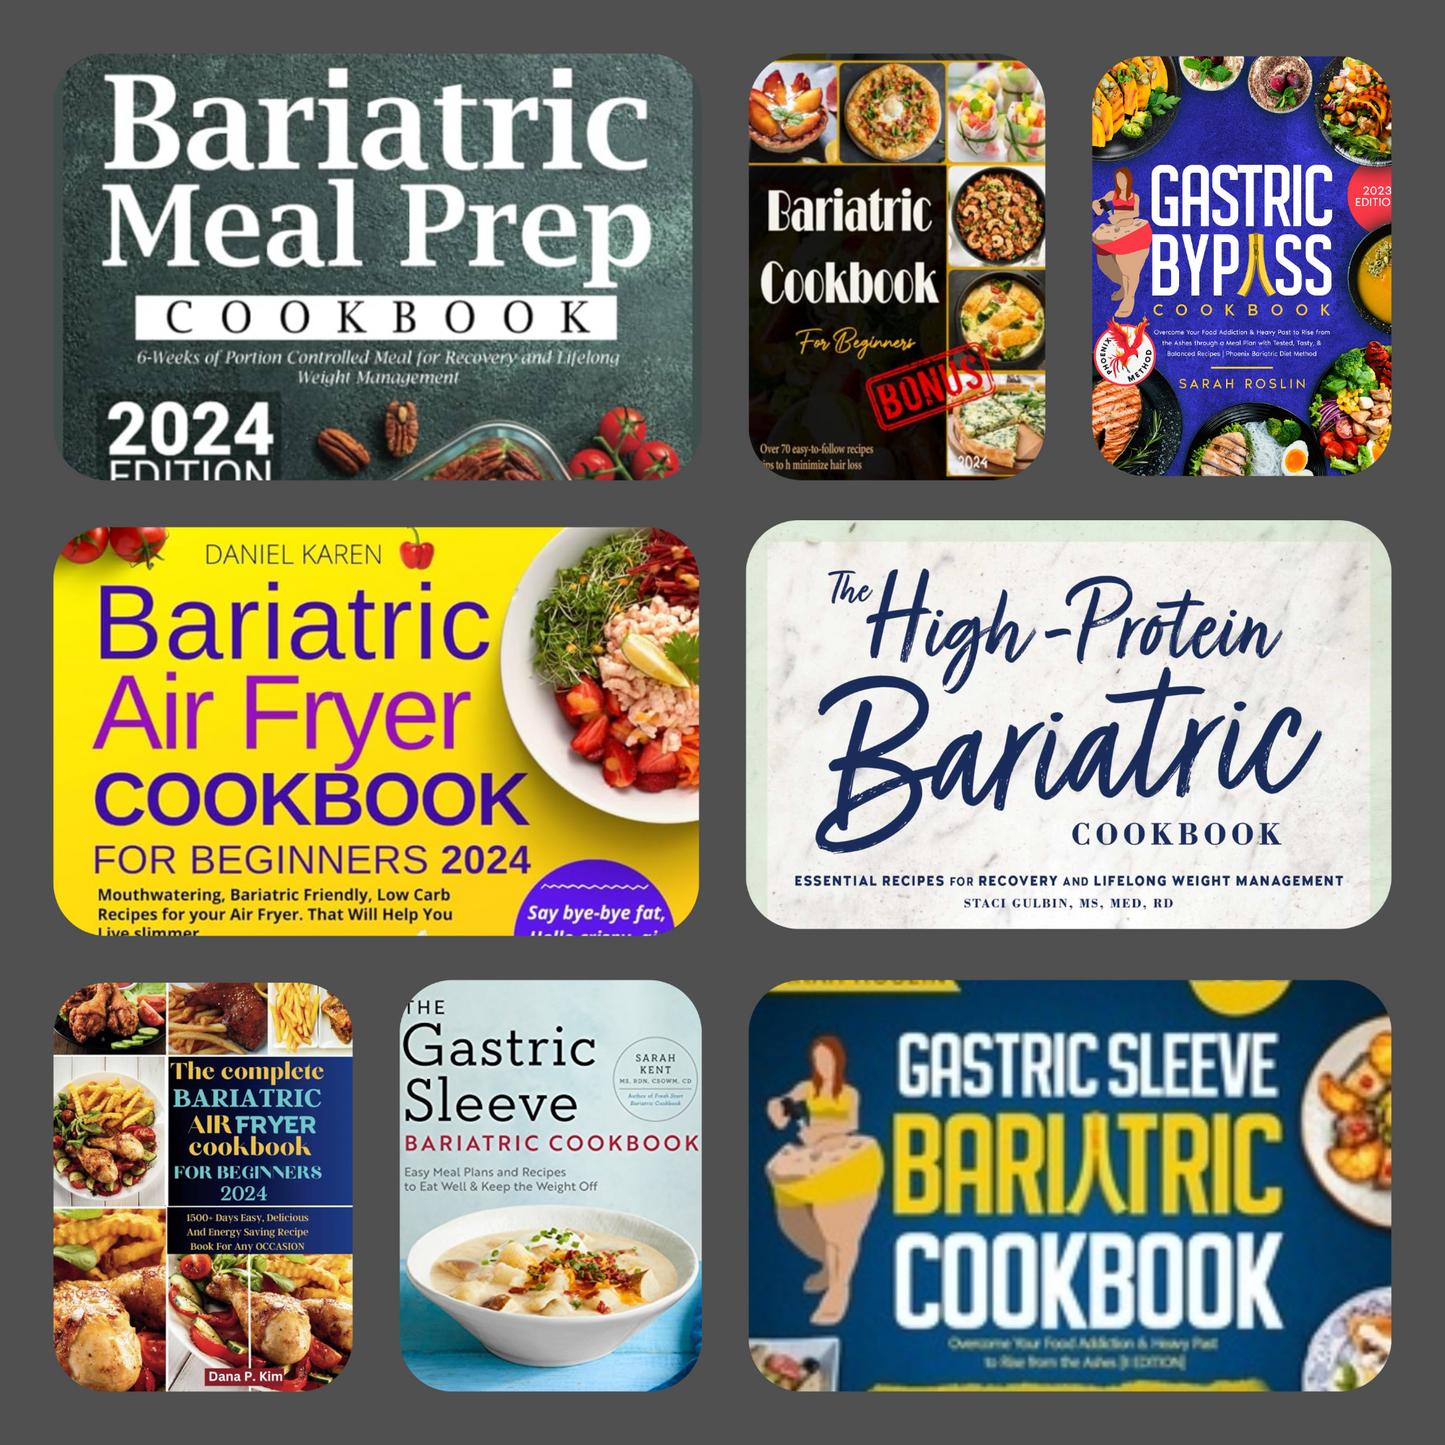 Bariatric and Gastric Cookbooks bundle 2024 ( Special Offer for Beginners )